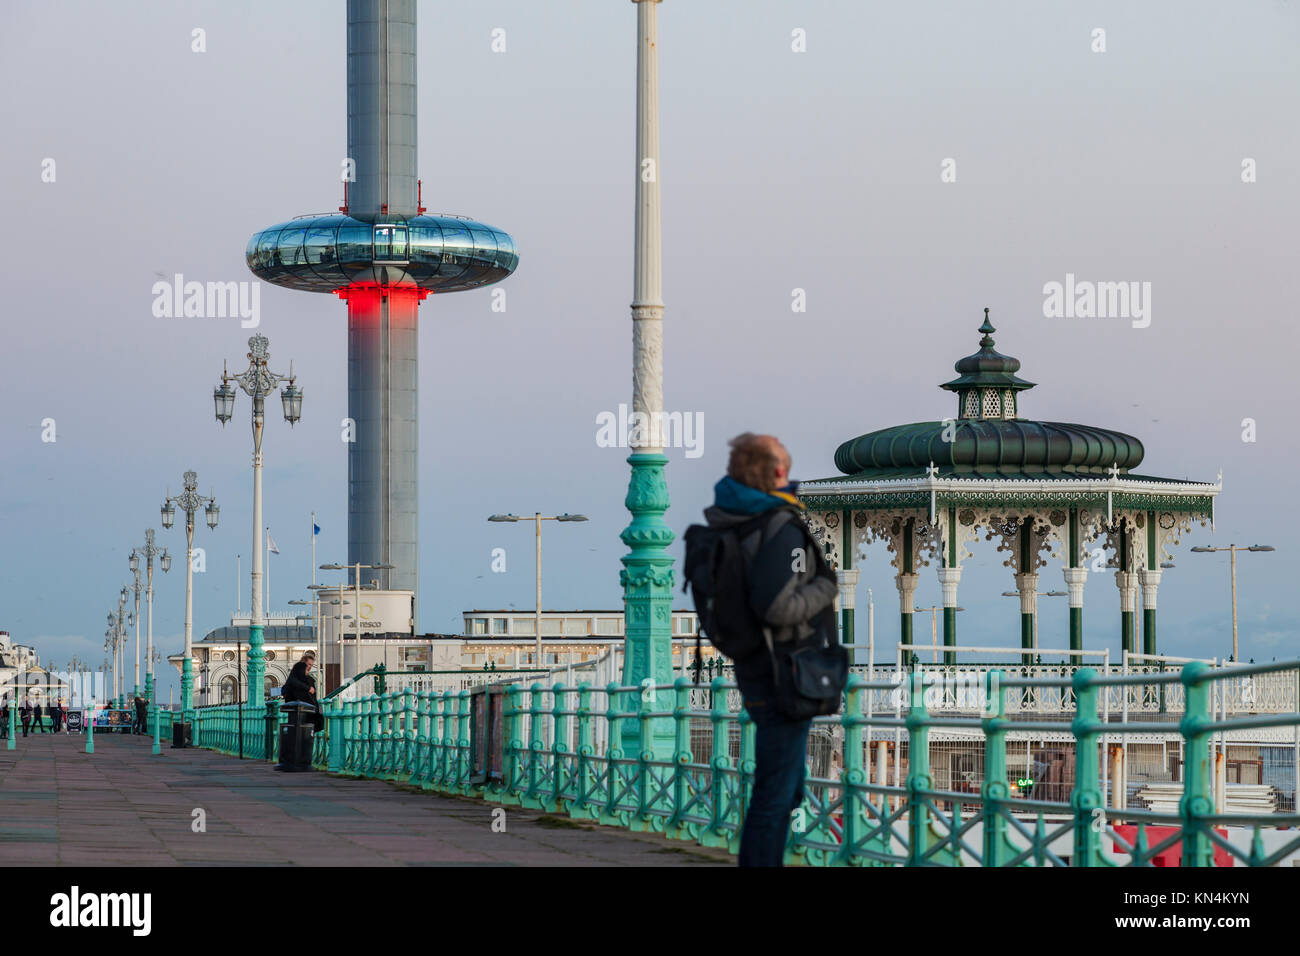 Evening on Brighton seafront, UK. Victorian bandstand and i360 tower in the distance. Stock Photo